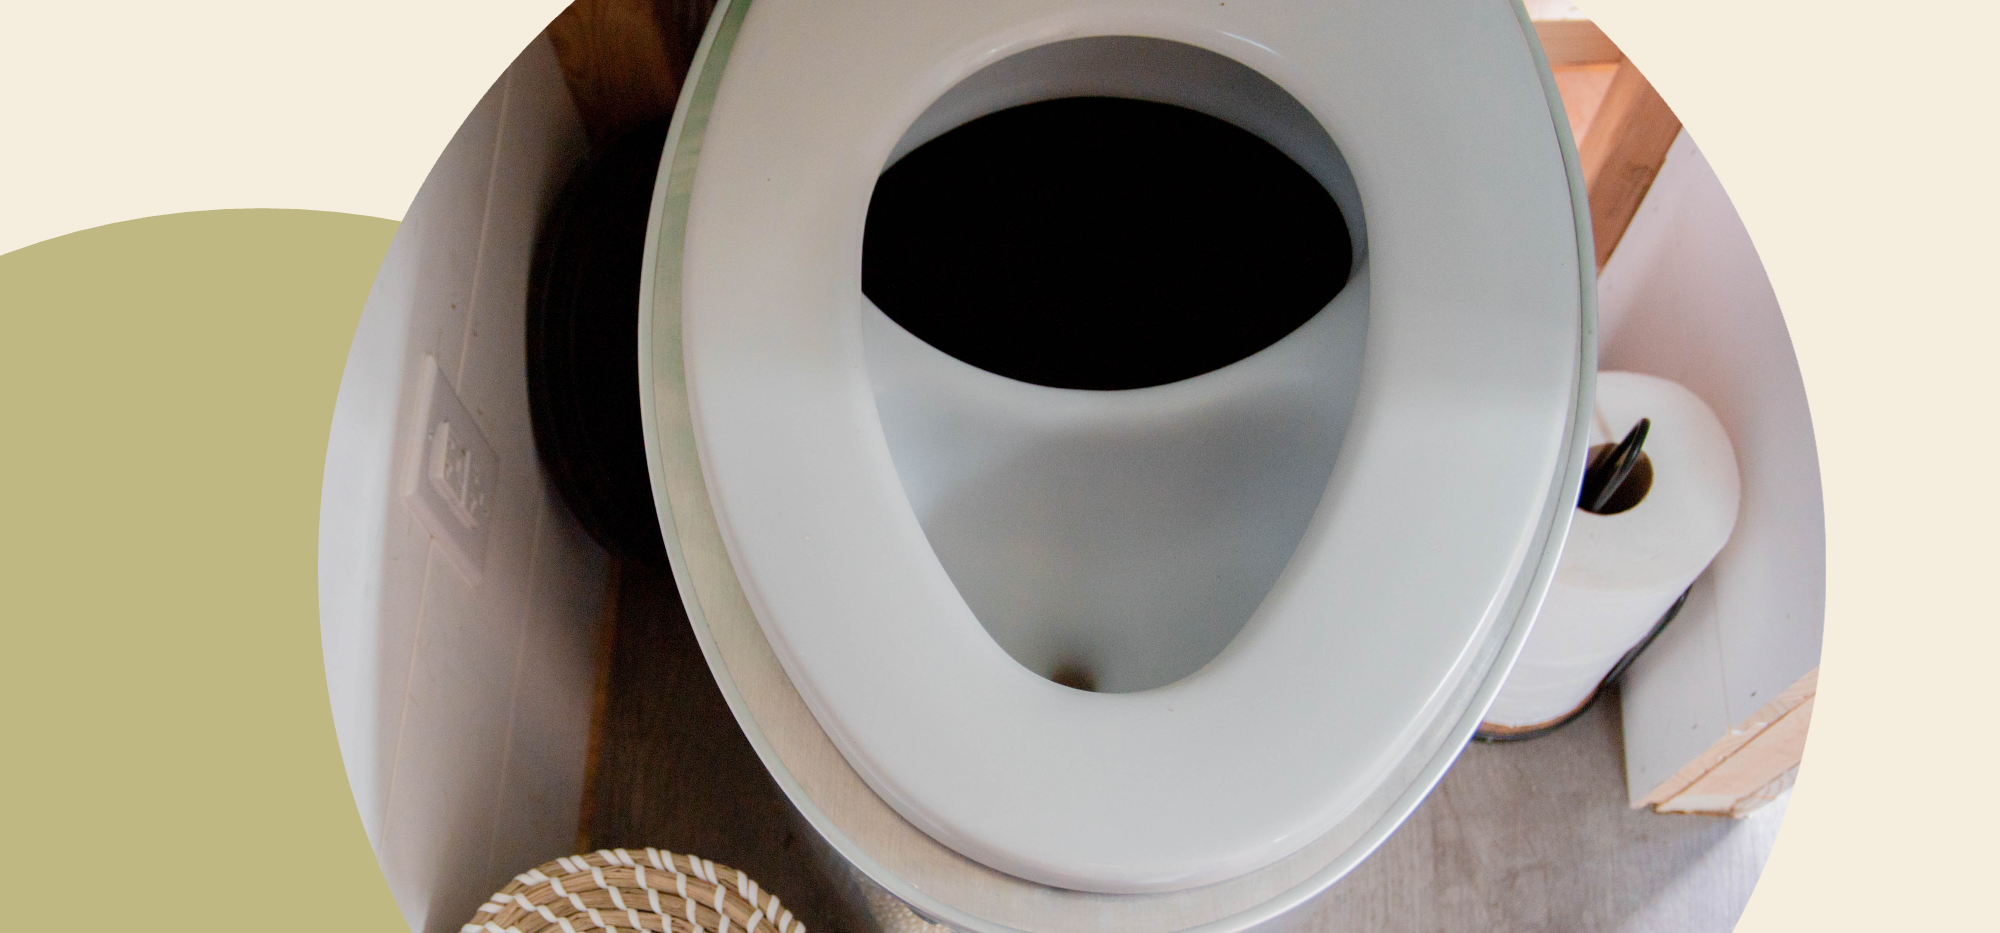 Why you Should Separate Liquids and Solids in a Composting Toilet